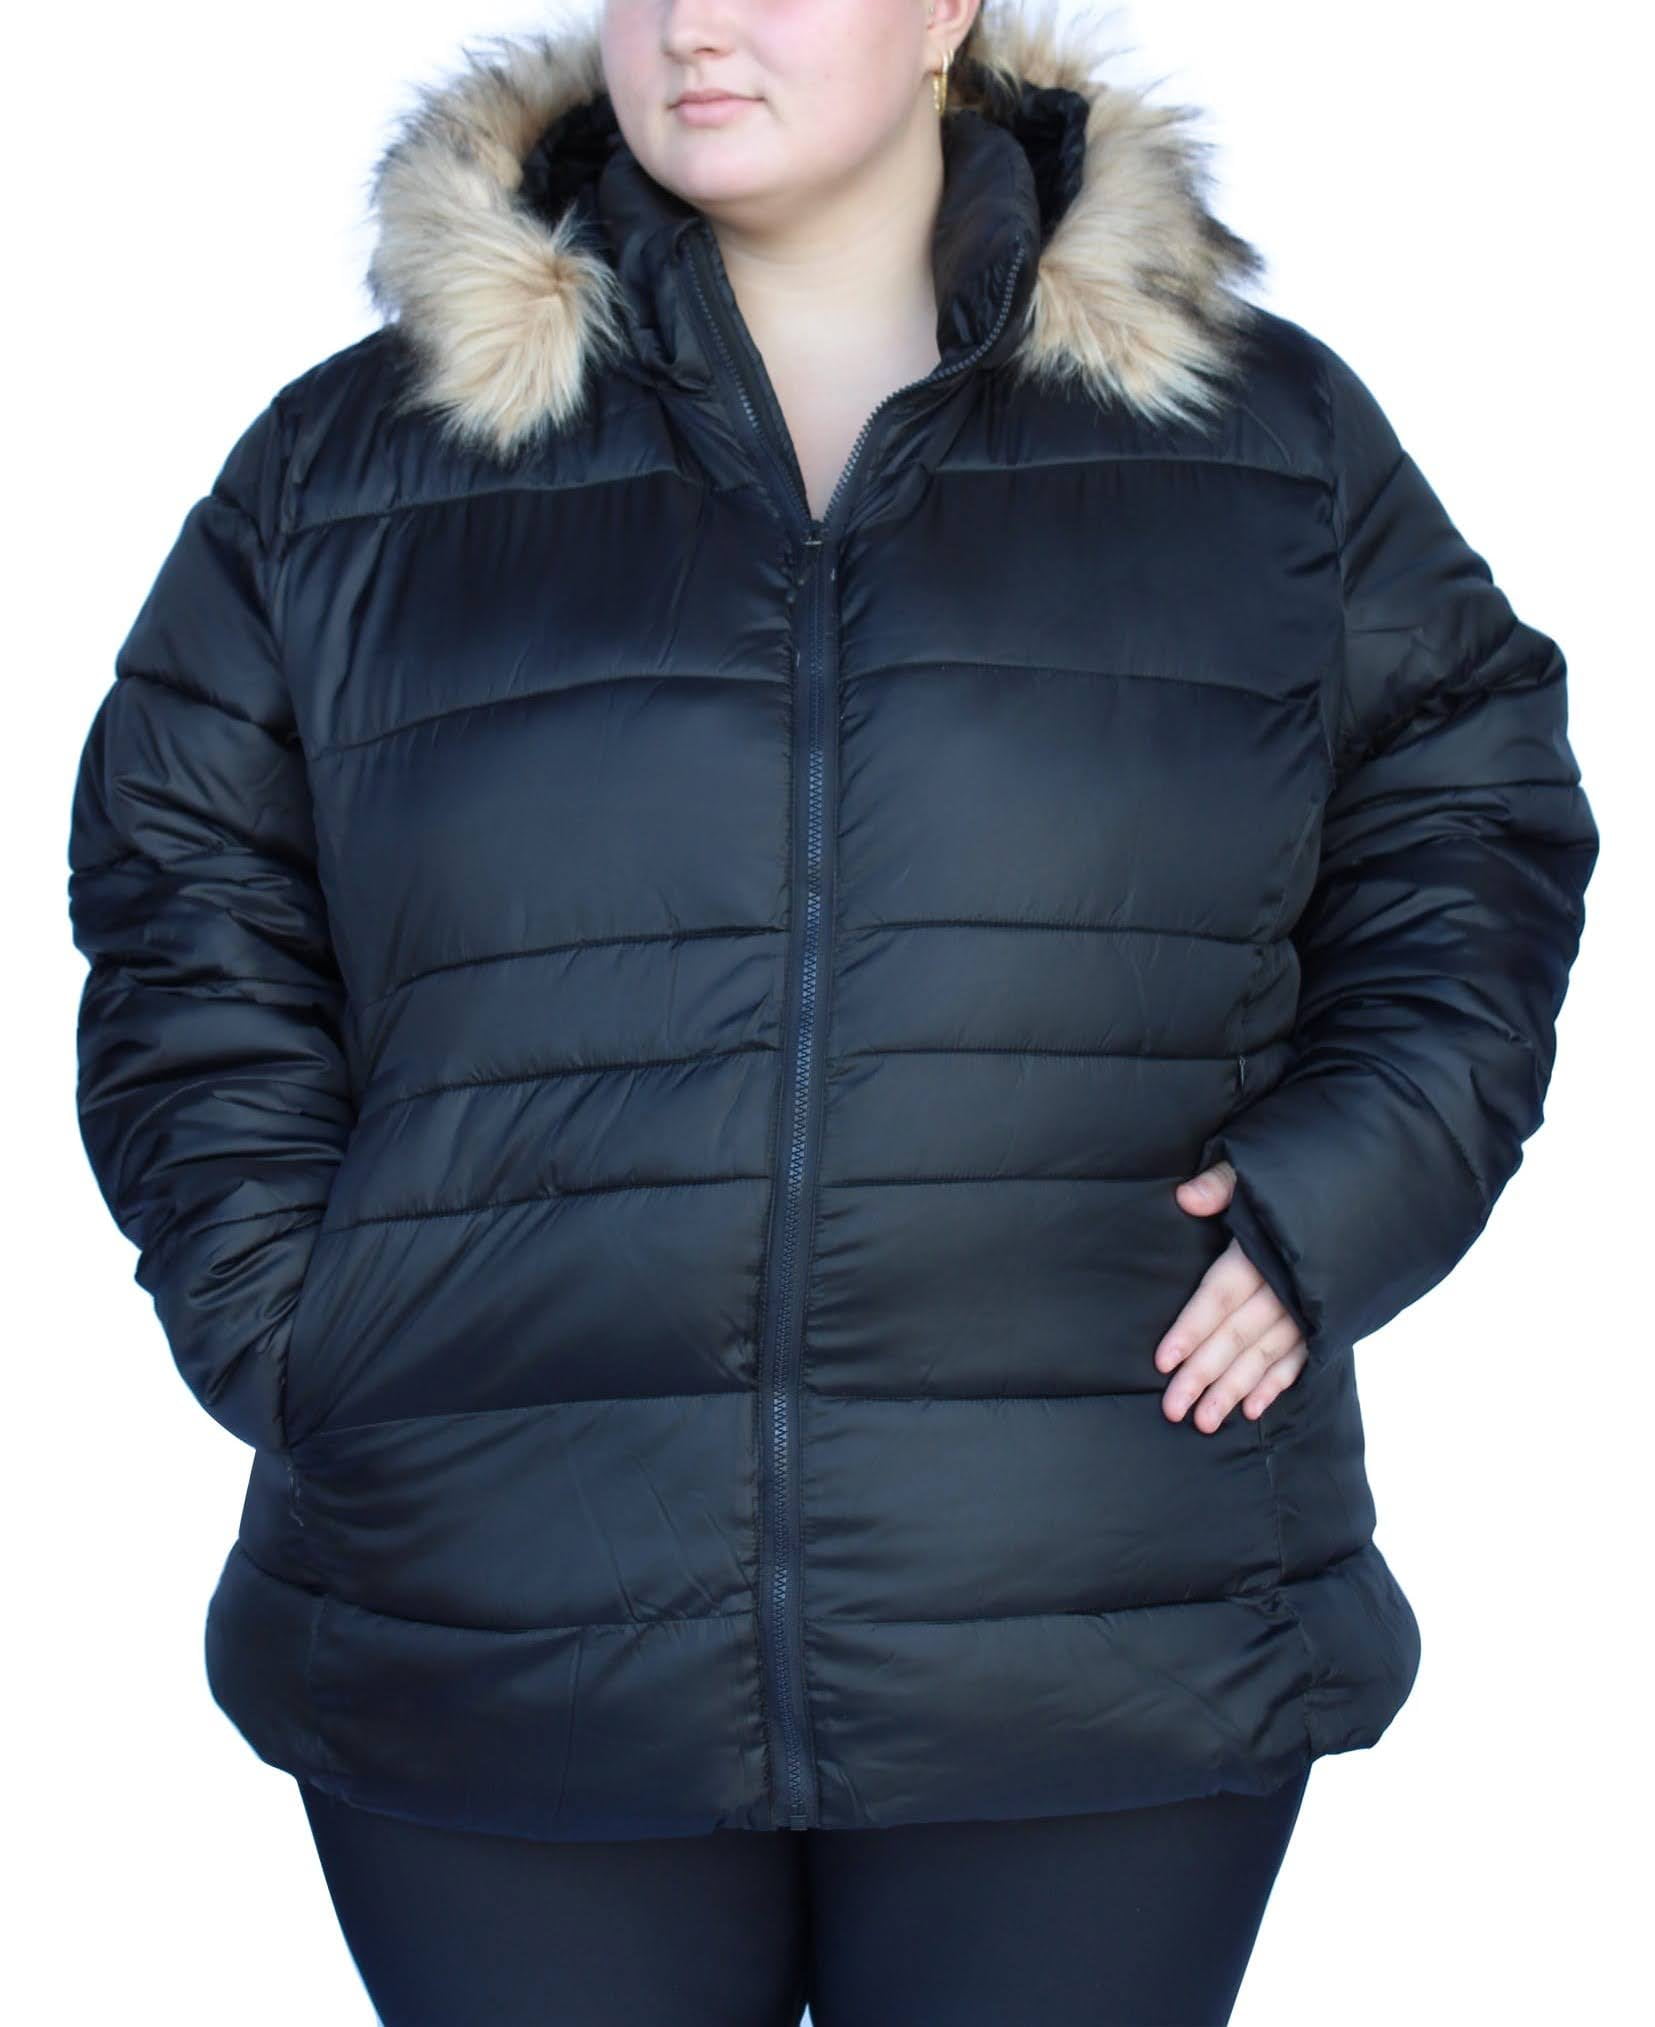 Snow Country Outerwear Women’s 1X-6X Plus Extended Size Packable Down  Jacket Hooded Coat